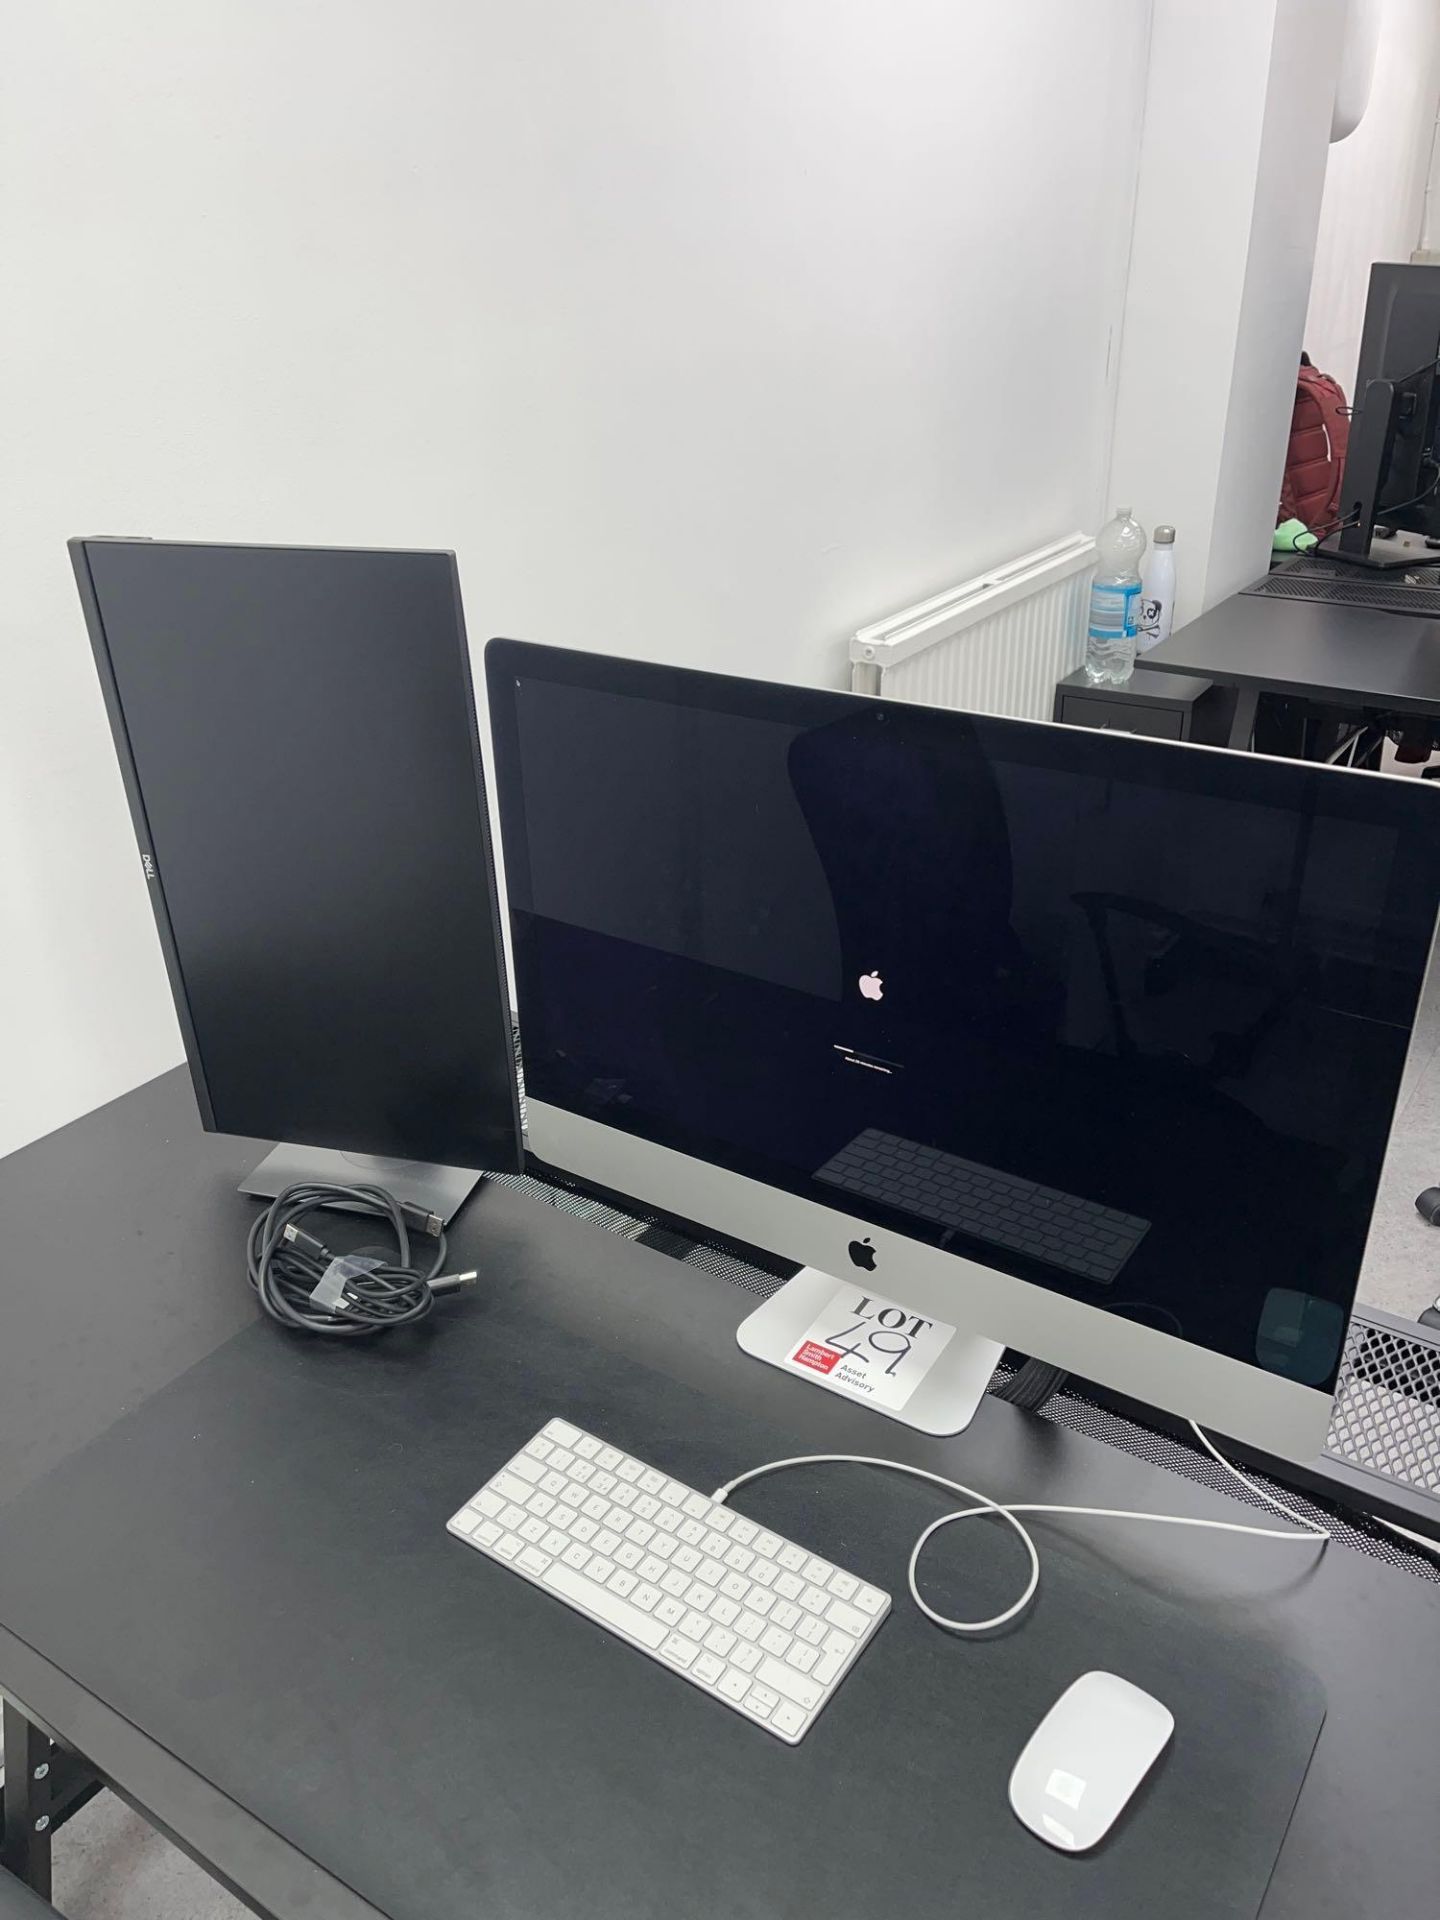 Apple 27inch Retina 5K 3.4GHz core i5 iMac , serial number C02XL1S3J1GG (Mid 2017) with Dell TFT - Image 2 of 3